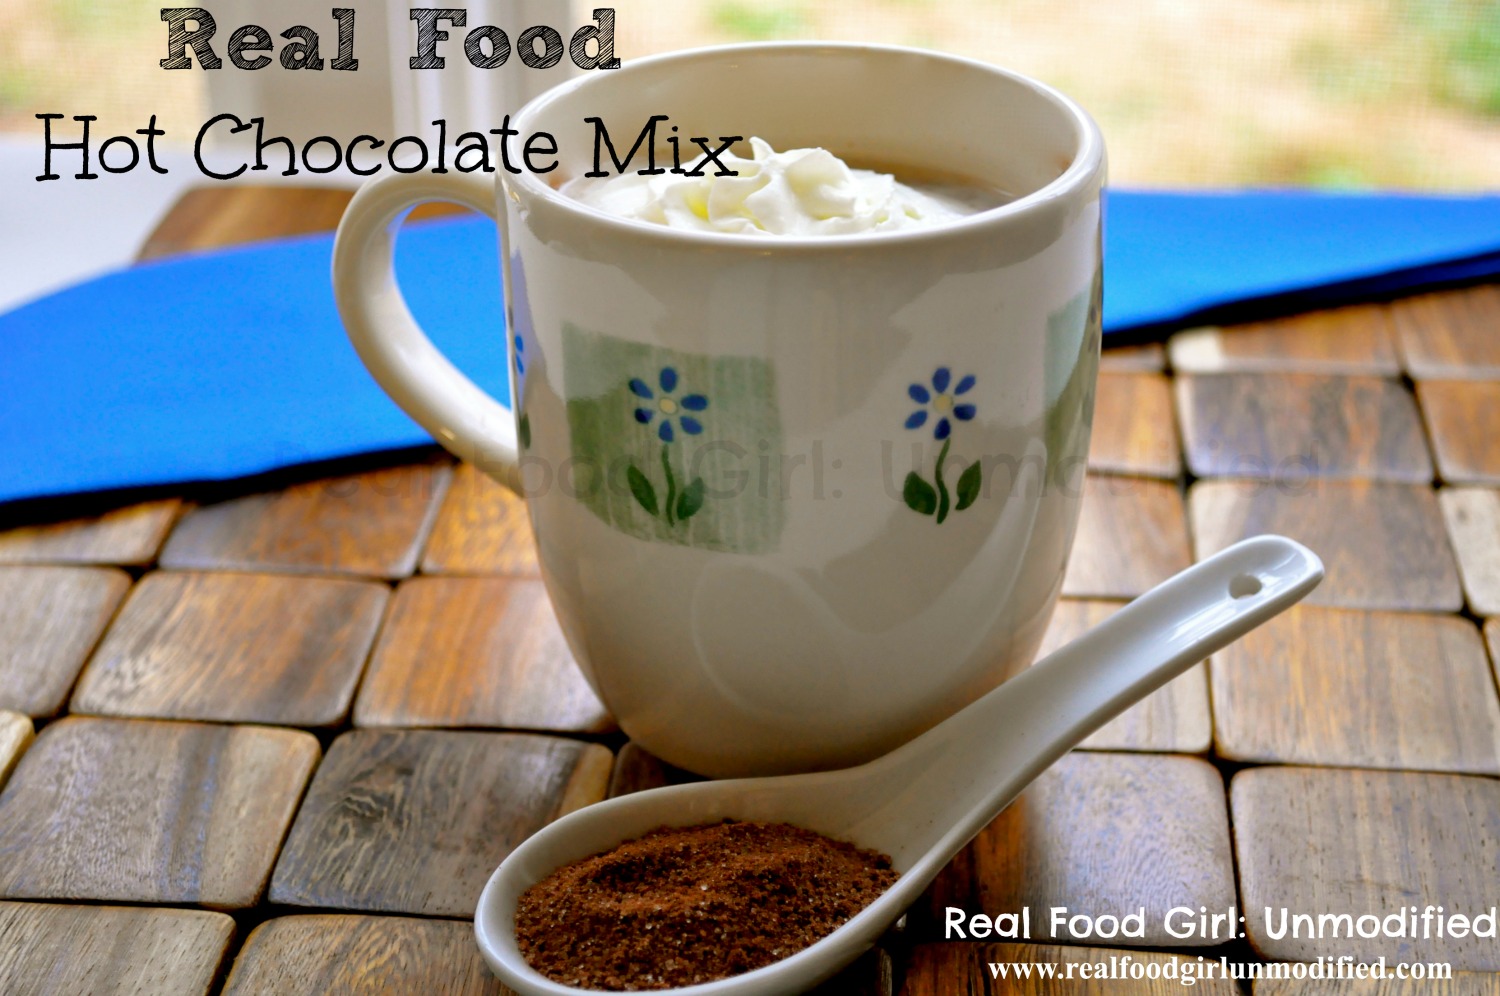 Real Food Hot Cocoa Mix by Real Food Girl: Unmodified